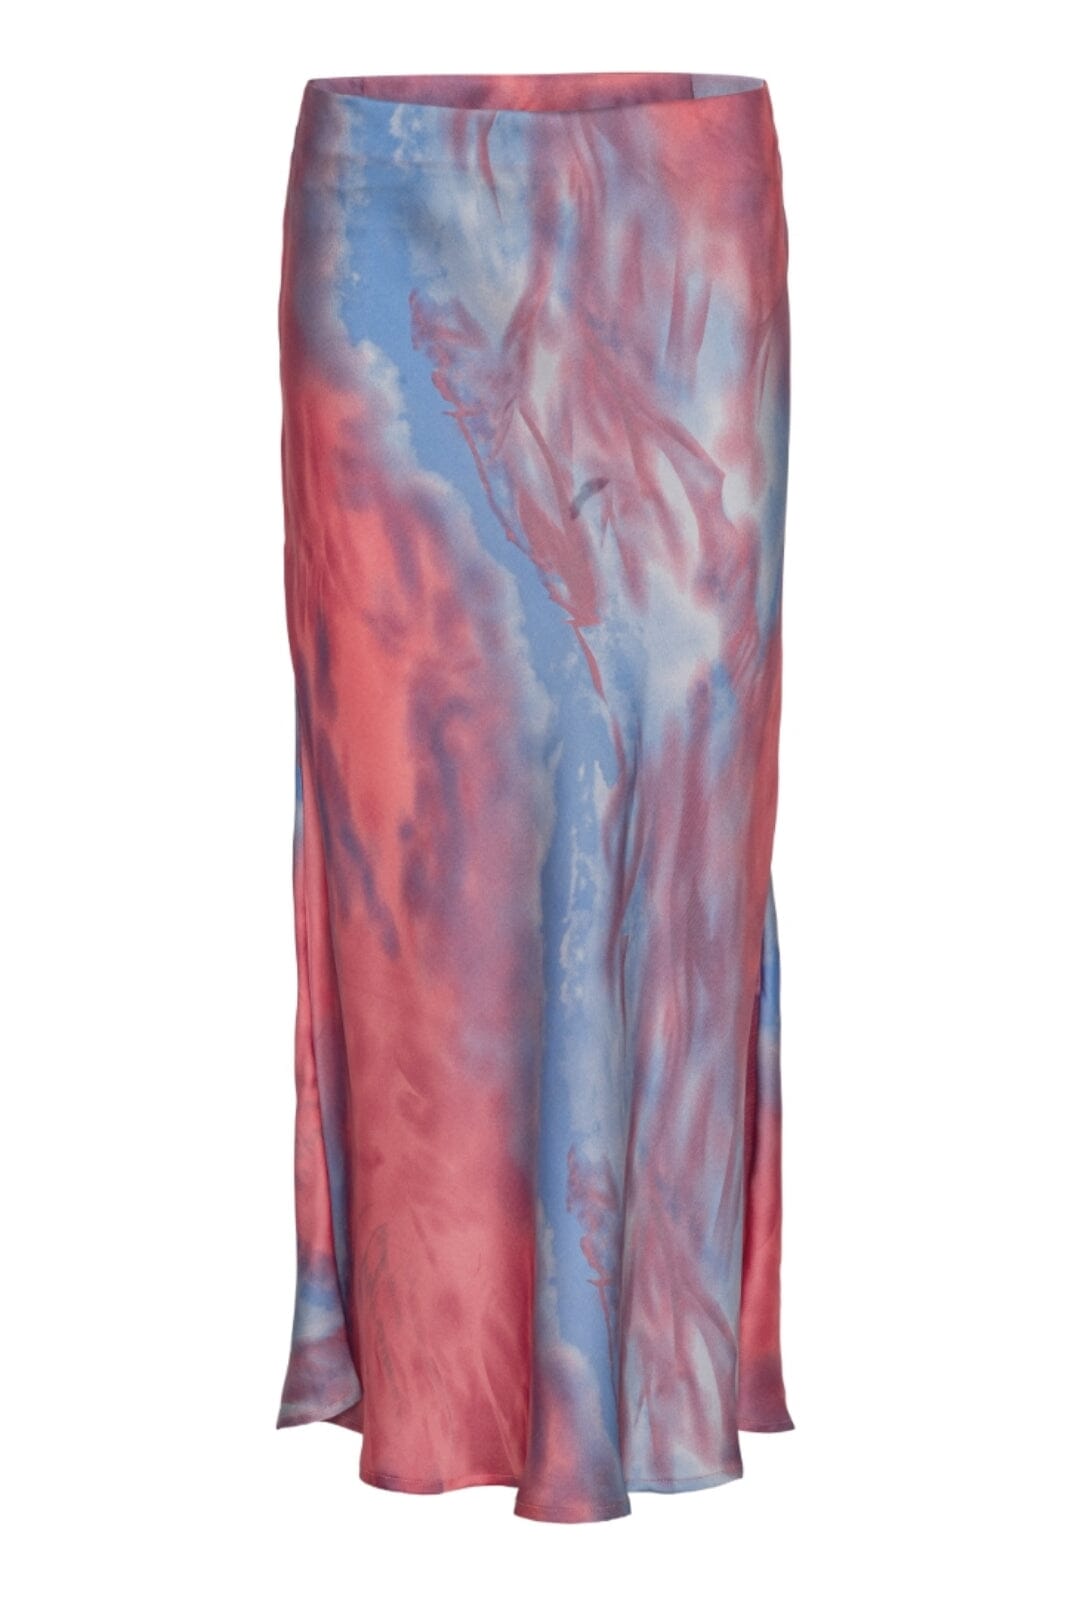 A-View - Carry Skirt - 256 Coral/Blue Nederdele 